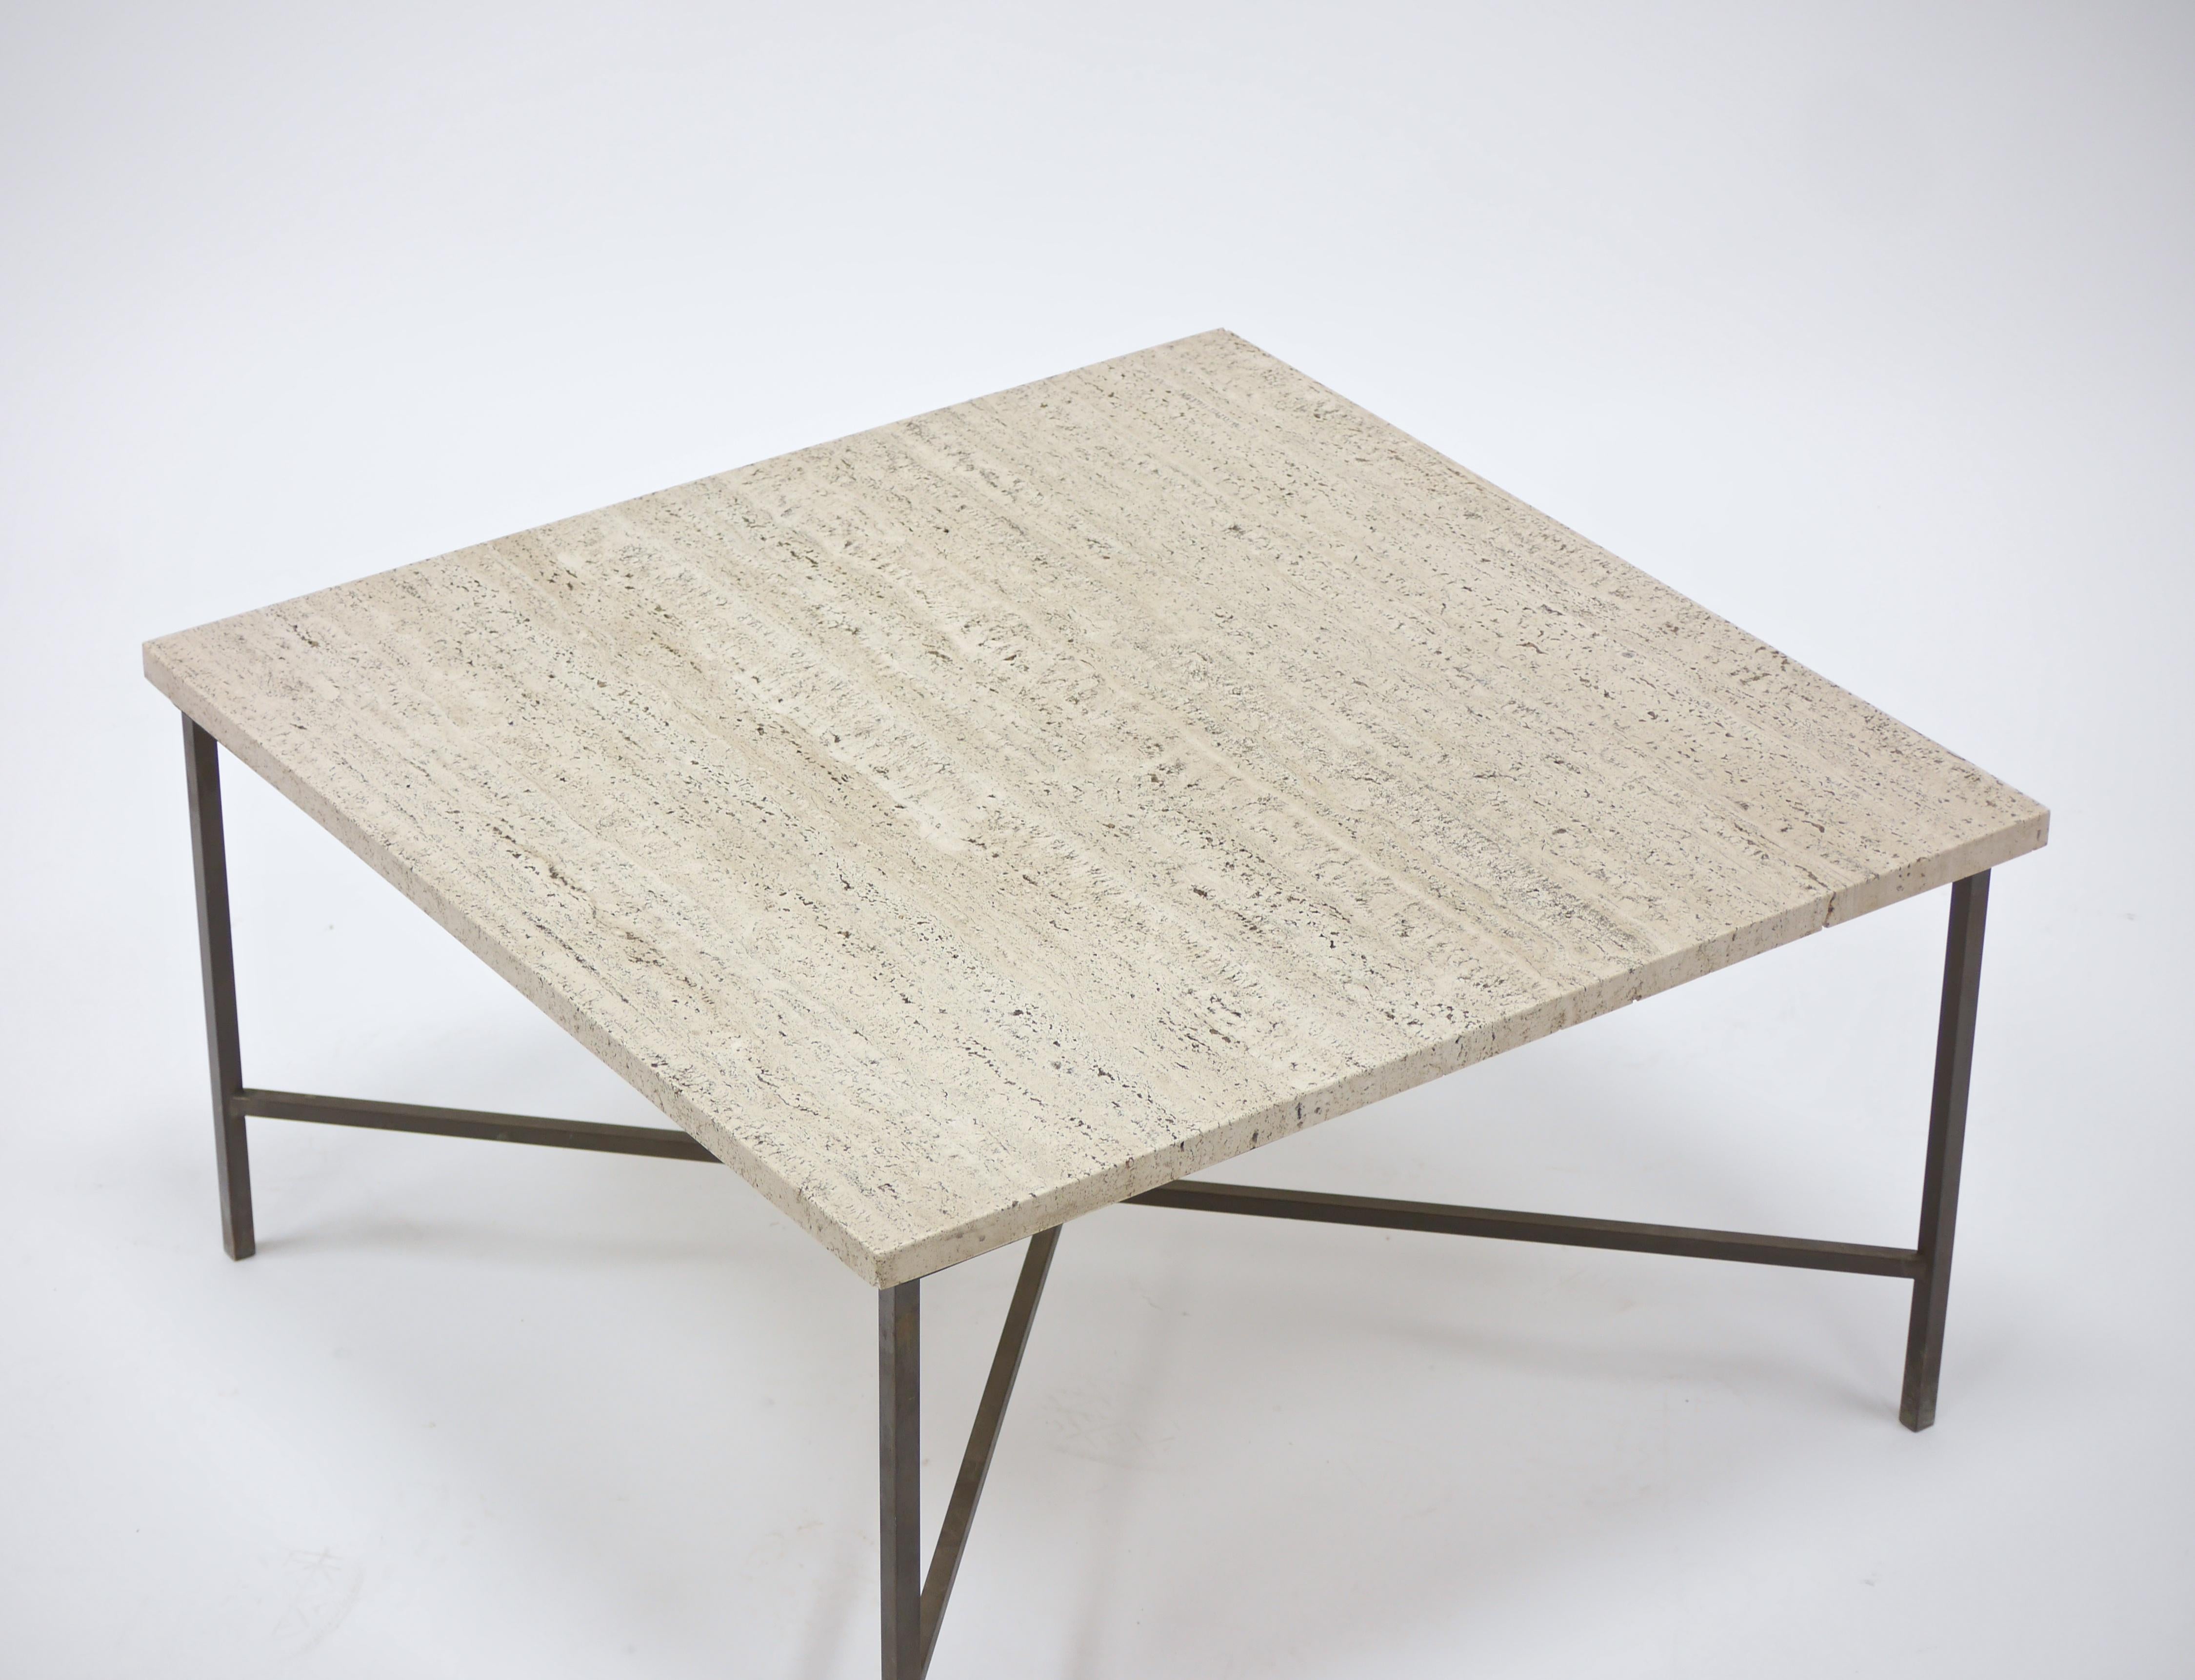 20th Century Bronze and Travertine table by Harvey Probber